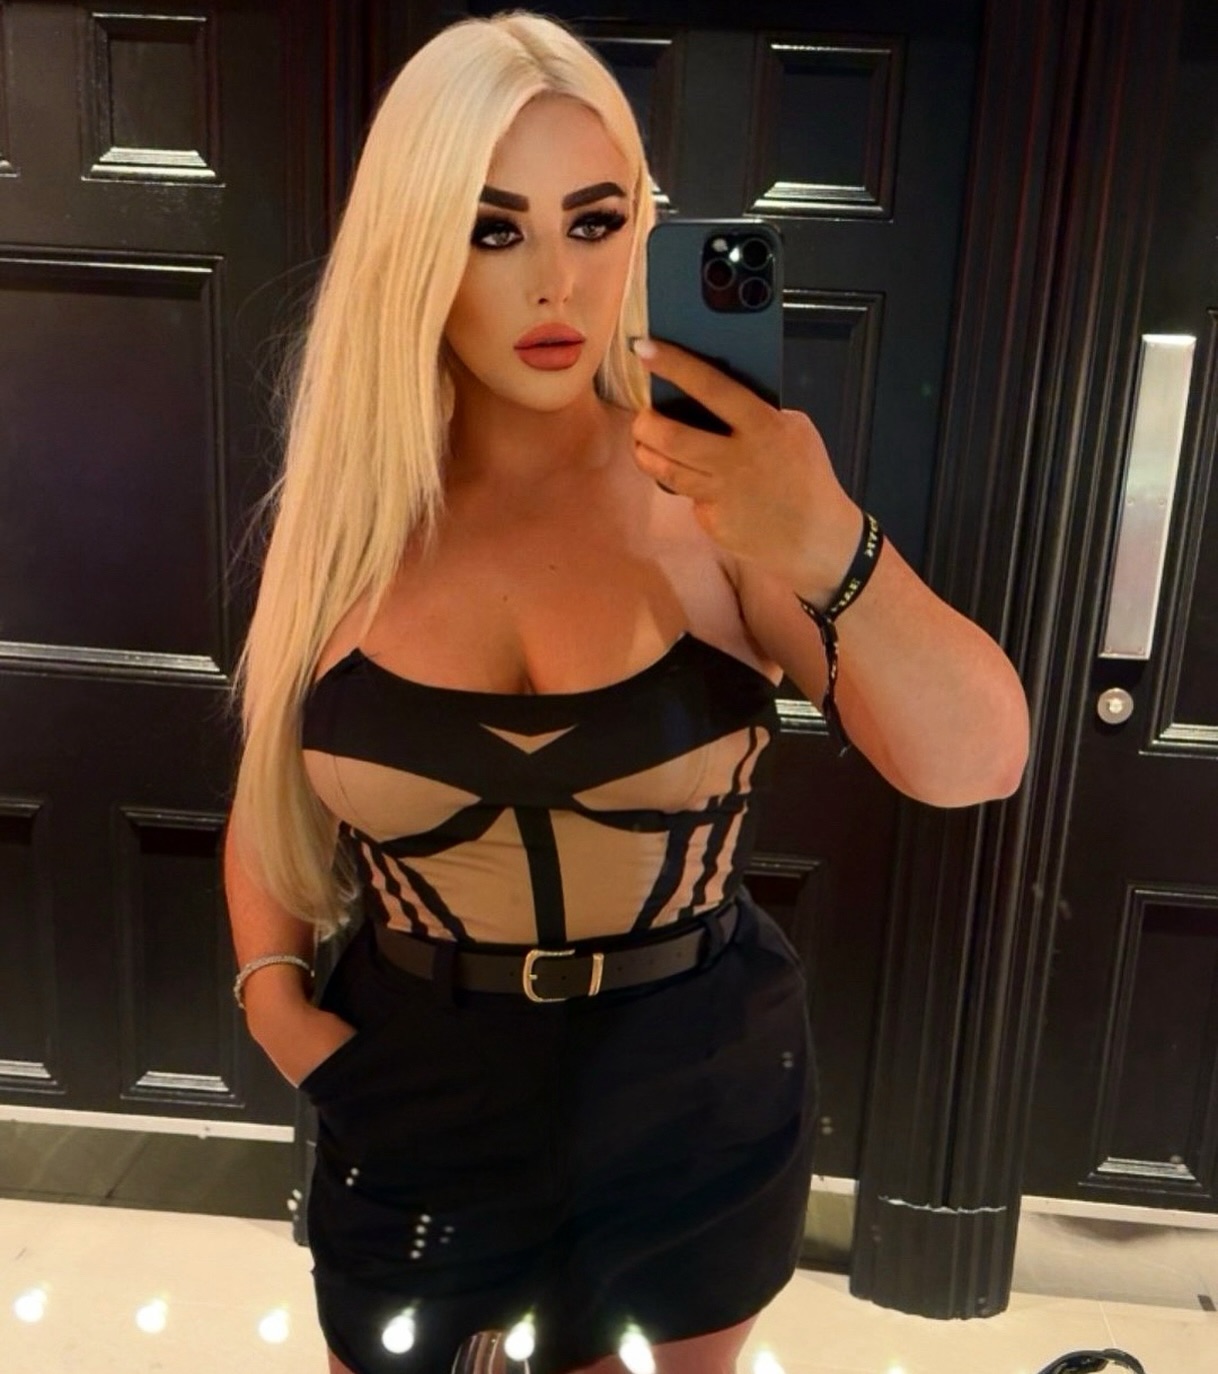 The reality TV veteran, who has appeared in five shows over the years, is now mum to a toddler, but admitted that she gets bombarded with comments on social media for her new curvaceous post-baby body